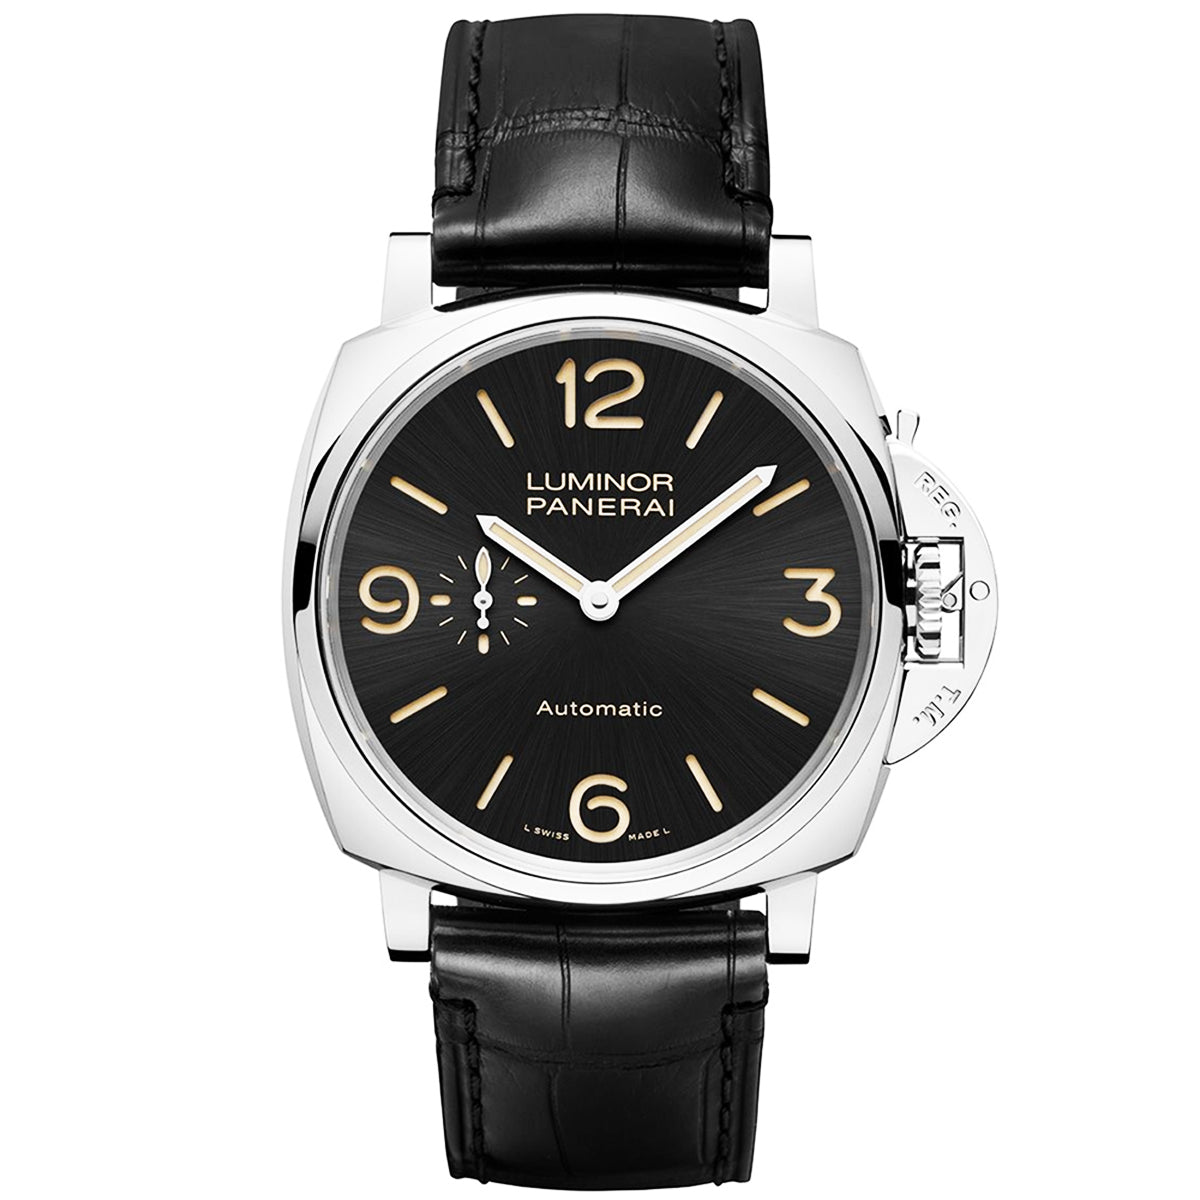 Luminor Due 45mm Black Sunray Dial Men's Automatic Watch